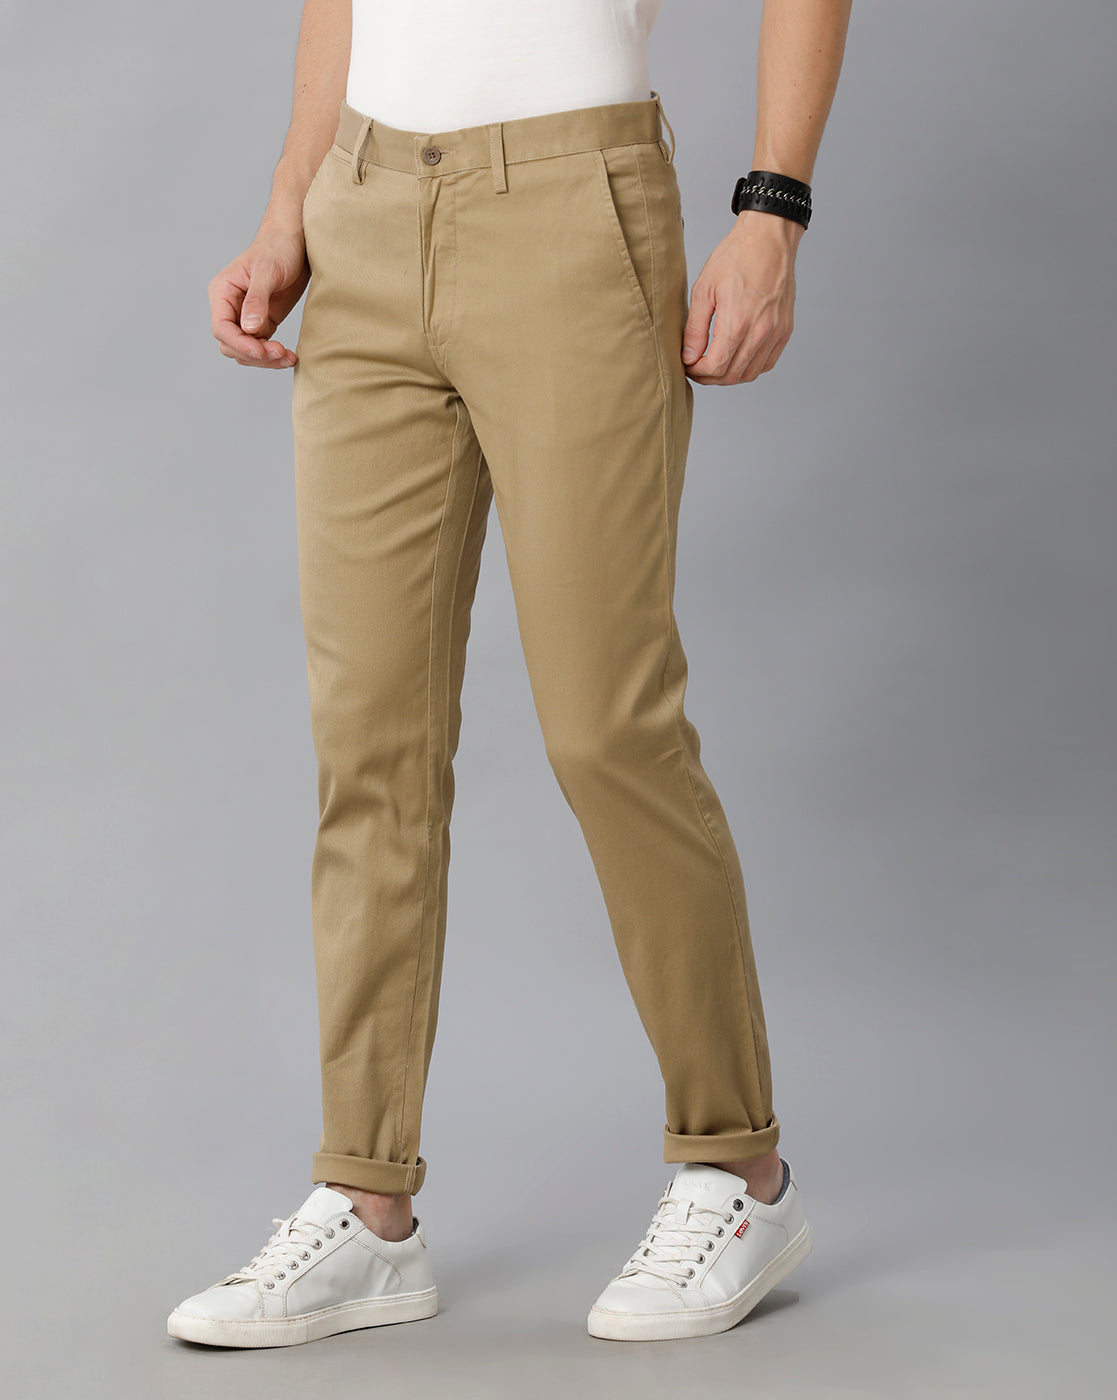 Casual Cotton Men's Cargo Pant, White Cargo, Men's Clothing, Relaxed Fit  Cargo, Quality wear Cargo, Men's